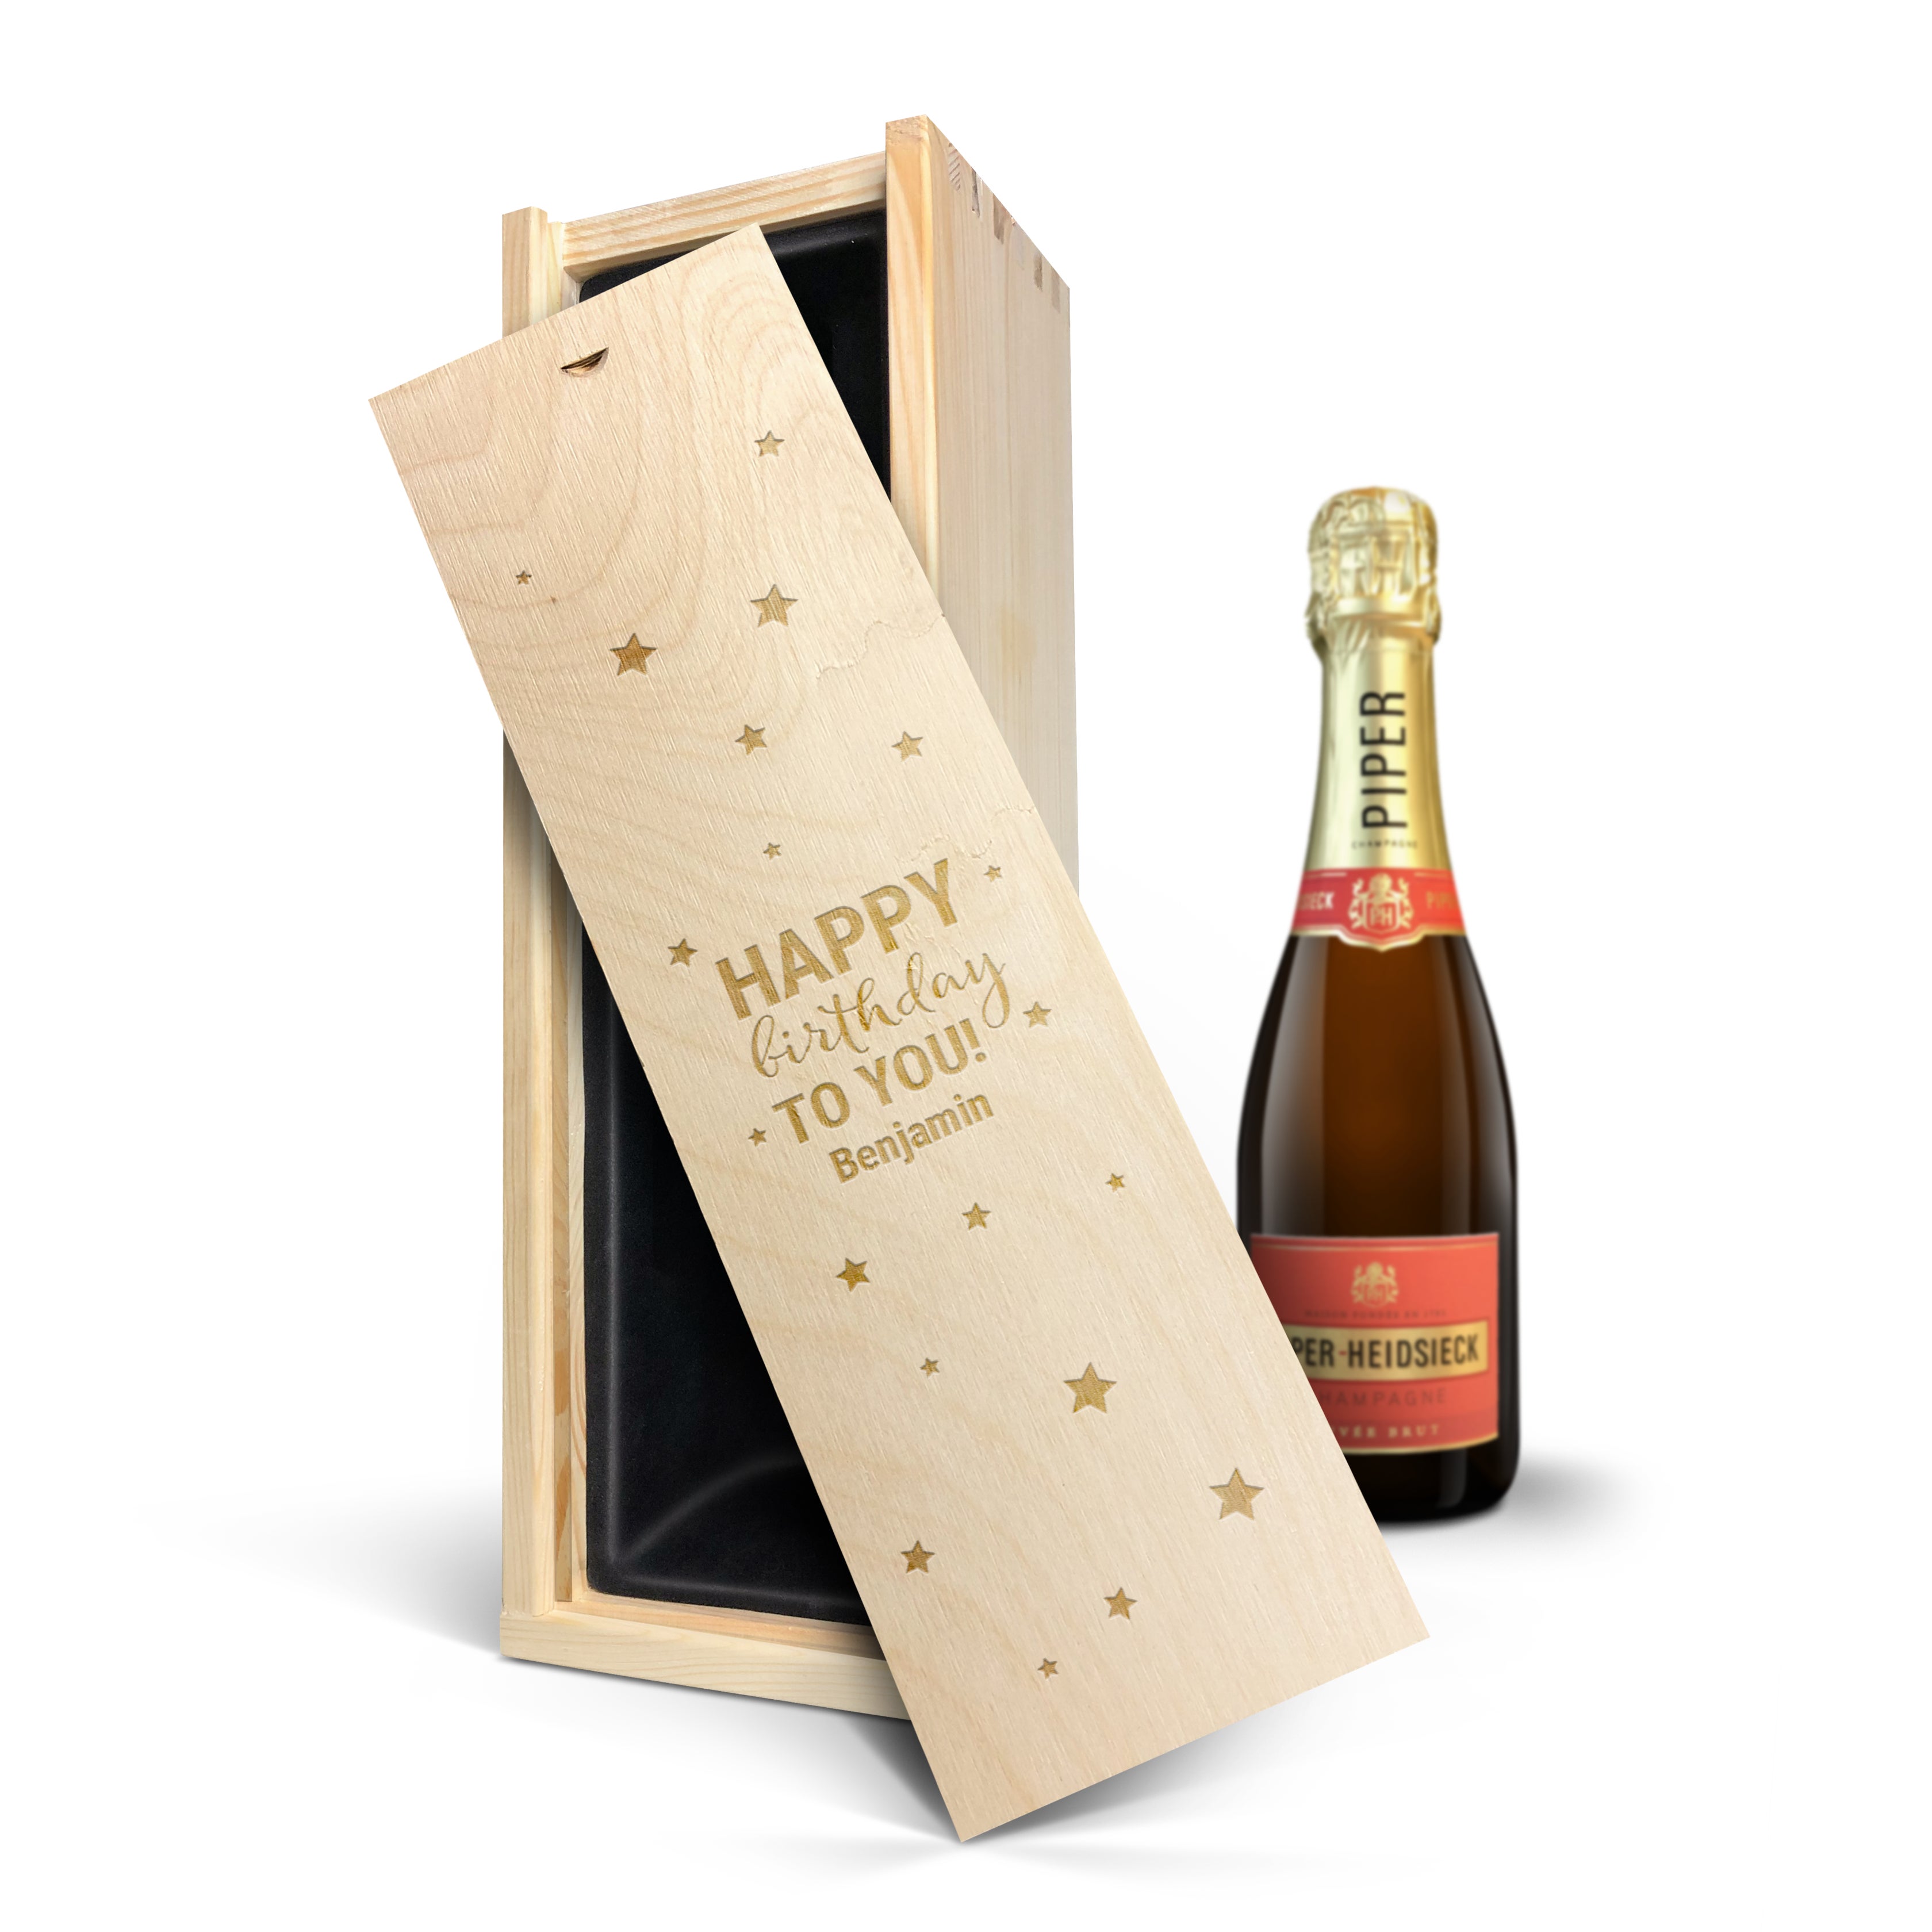 Personalised champagne gift - Piper Heidsieck Brut (375ml) - Engraved wooden case